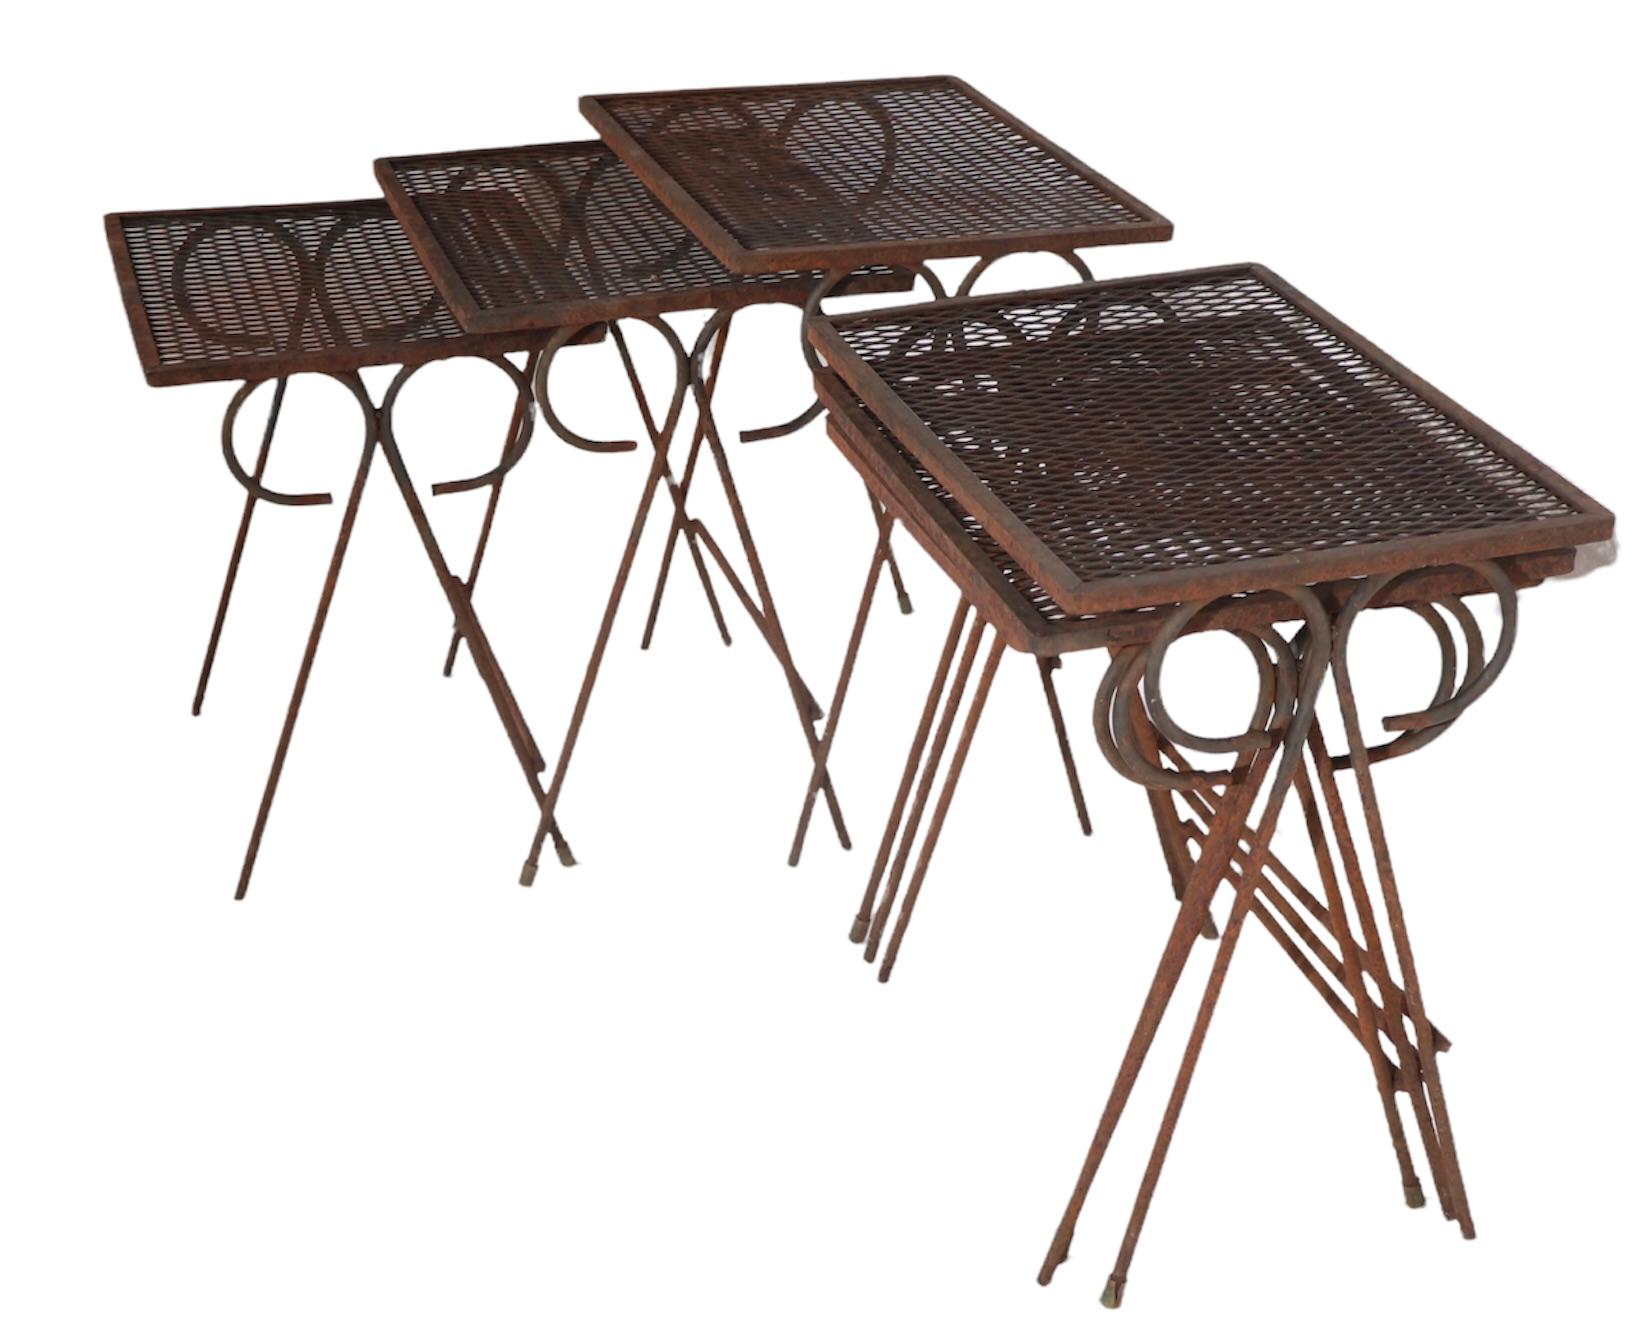 Matched sets of three graduated nesting tables of wrought iron, and metal mesh, designed by Maurizio Tempestini, for Salterini. The tables are all structurally sound and sturdy, some may be missing rubber pad feet, and all show surface rust. Usable